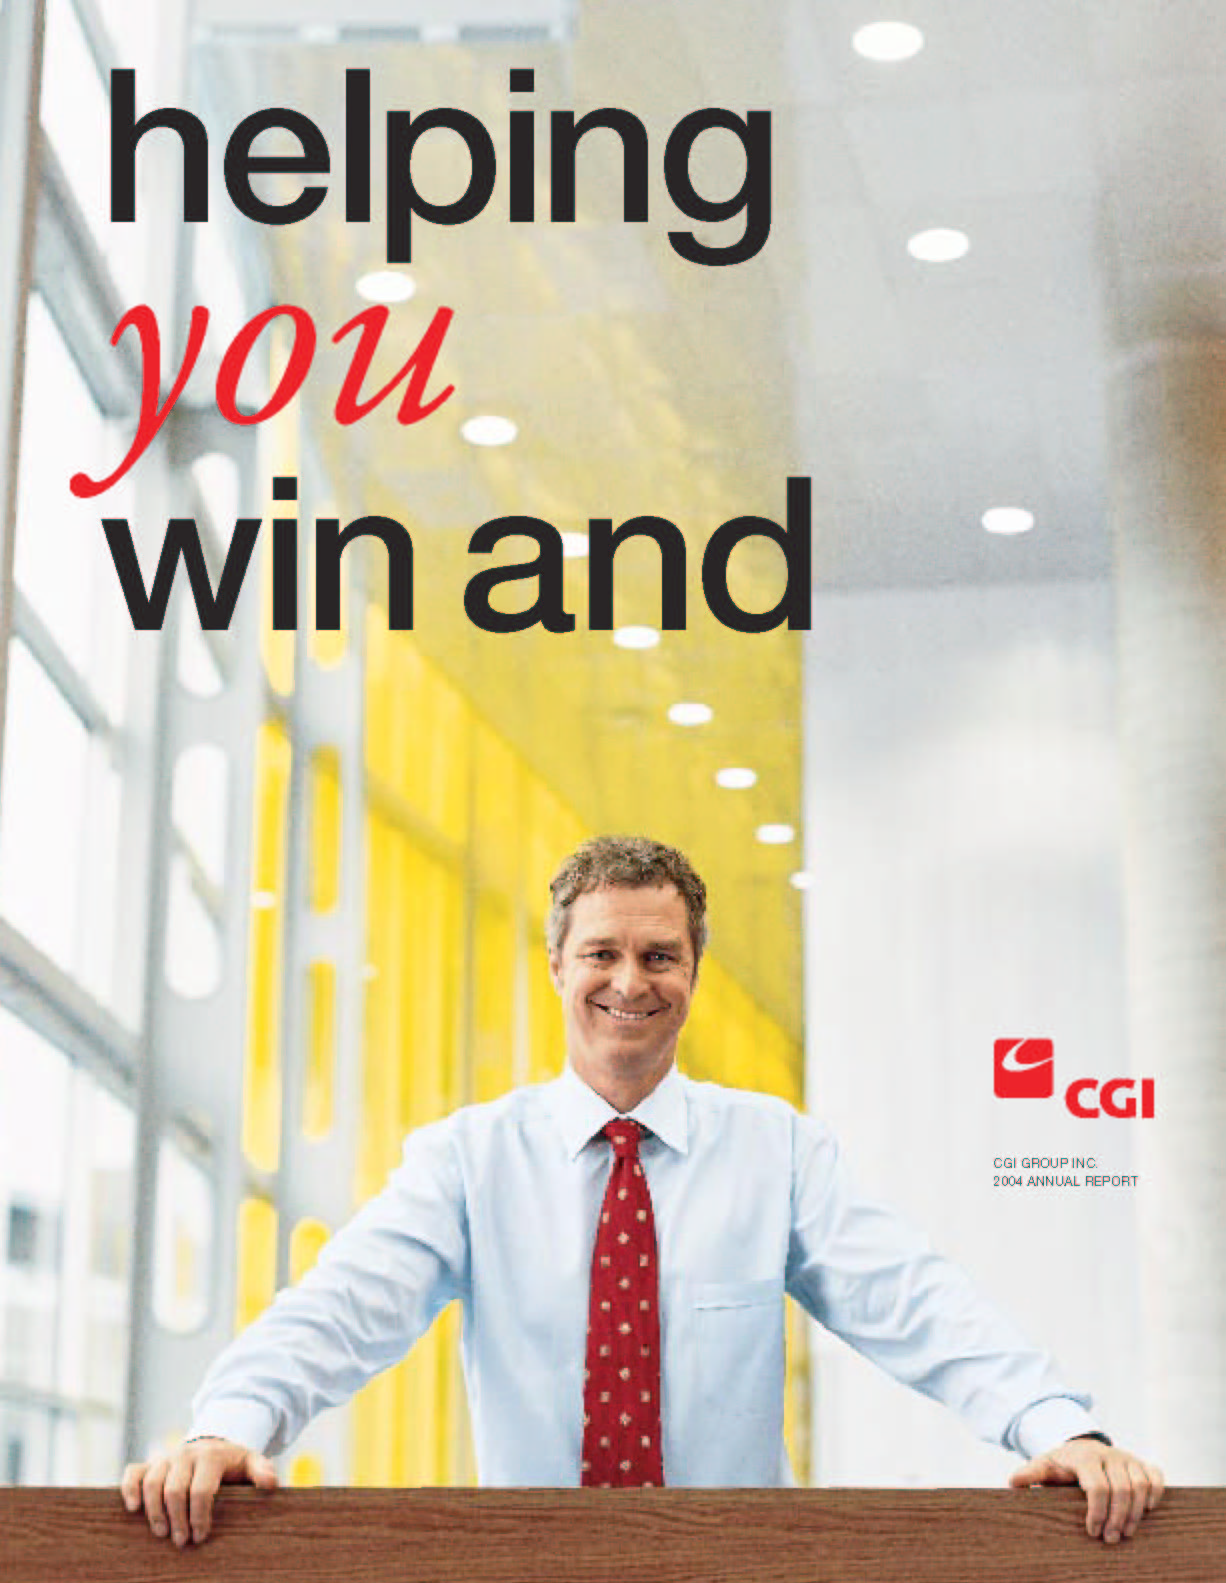 CGI GROUP INC. 2004 ANNUAL REPORT -- helping you win and...